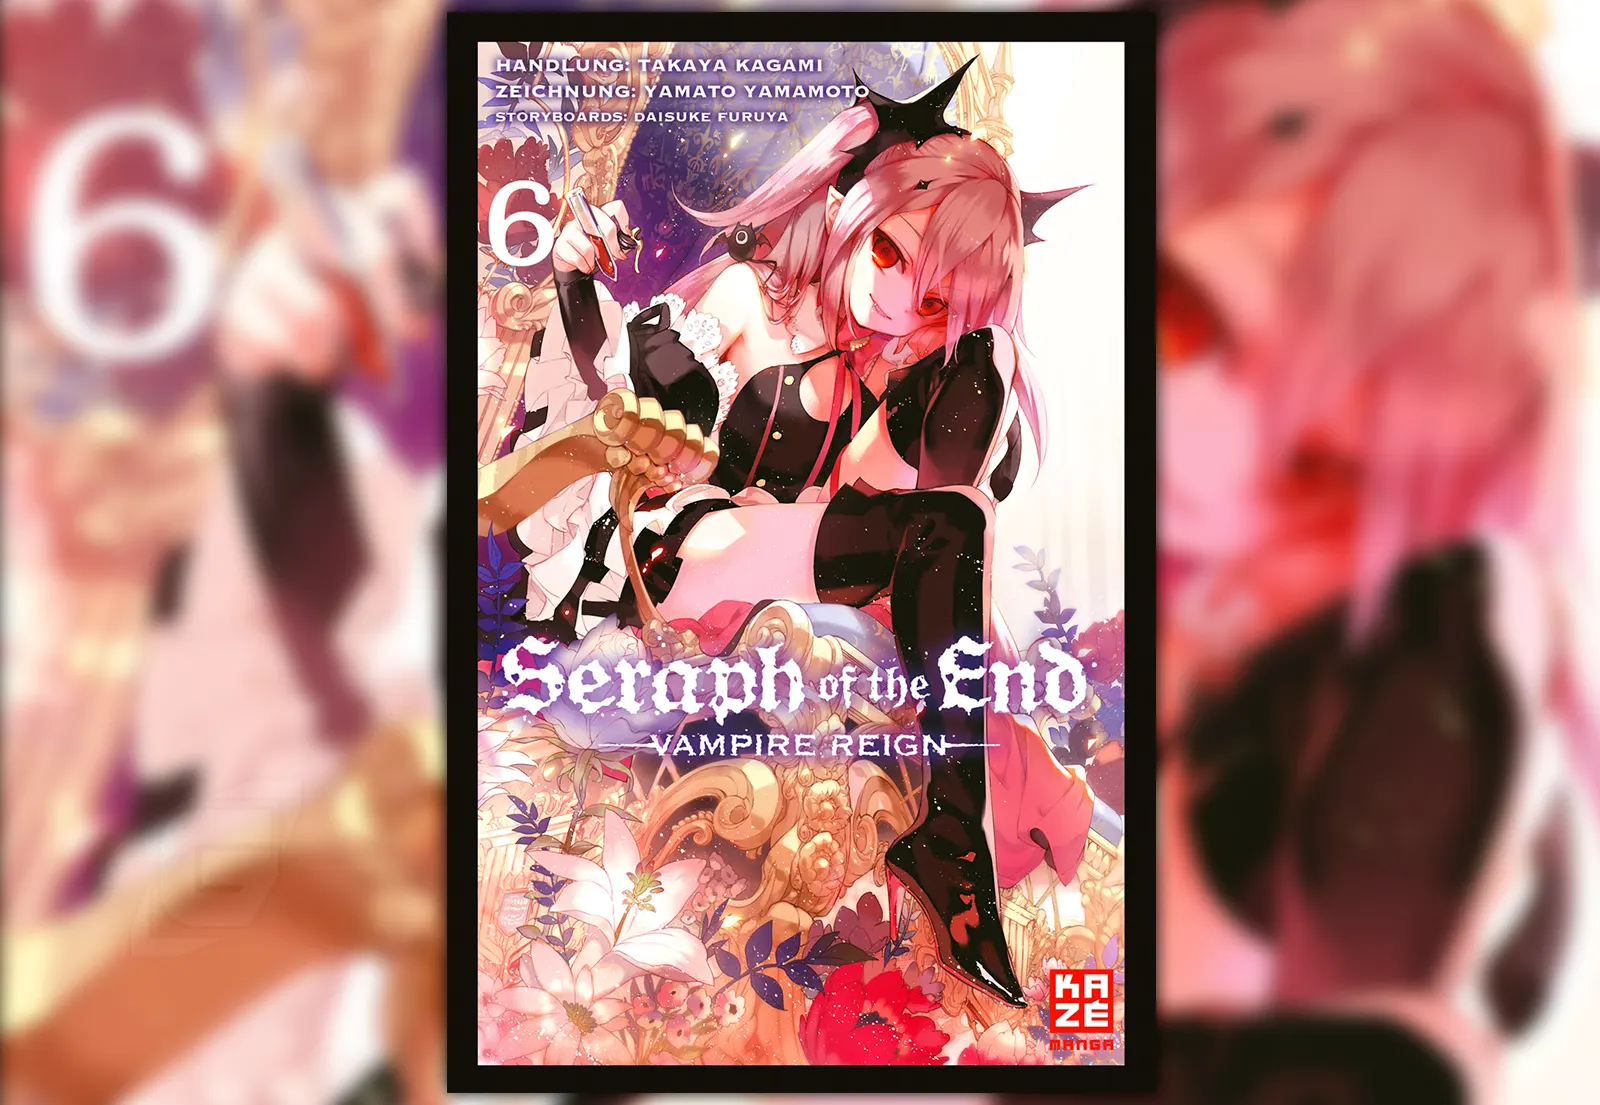 Review zu Seraph of the End Band 06